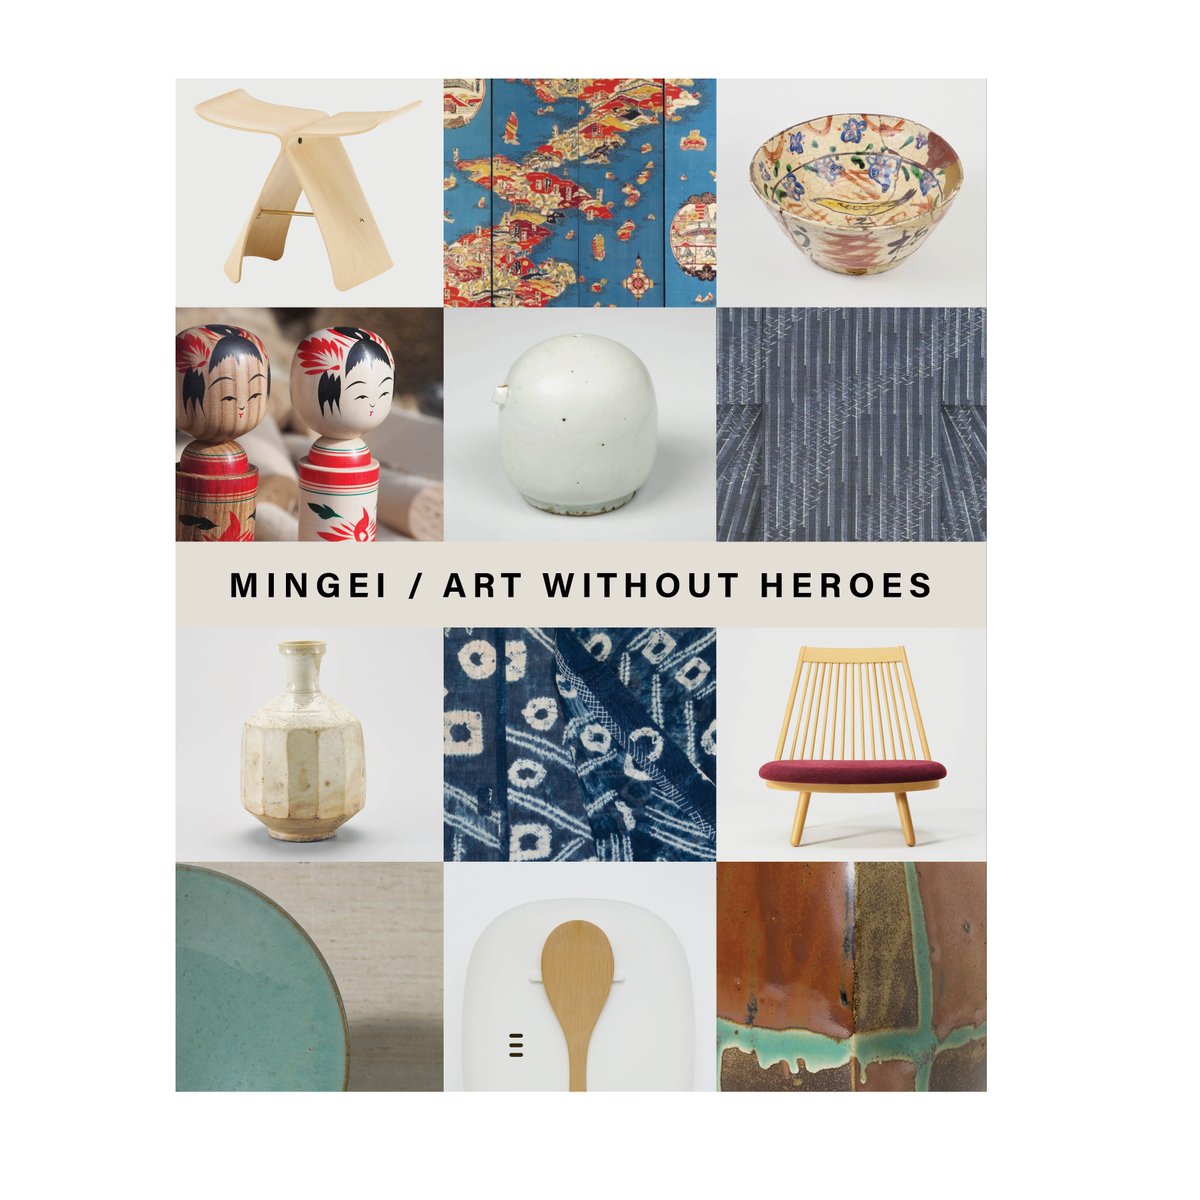 For @Londoncraftweek 2024, we're taking a deep dive into the themes of #ArtWithoutHereos with a panel of guests who have contributed to the book, 'Mingei / Art Without Heroes'. Wed 15 May. Tickets £7.50 or £5. 6-9pm. With @jpflondon. Info & book: bit.ly/43watIV